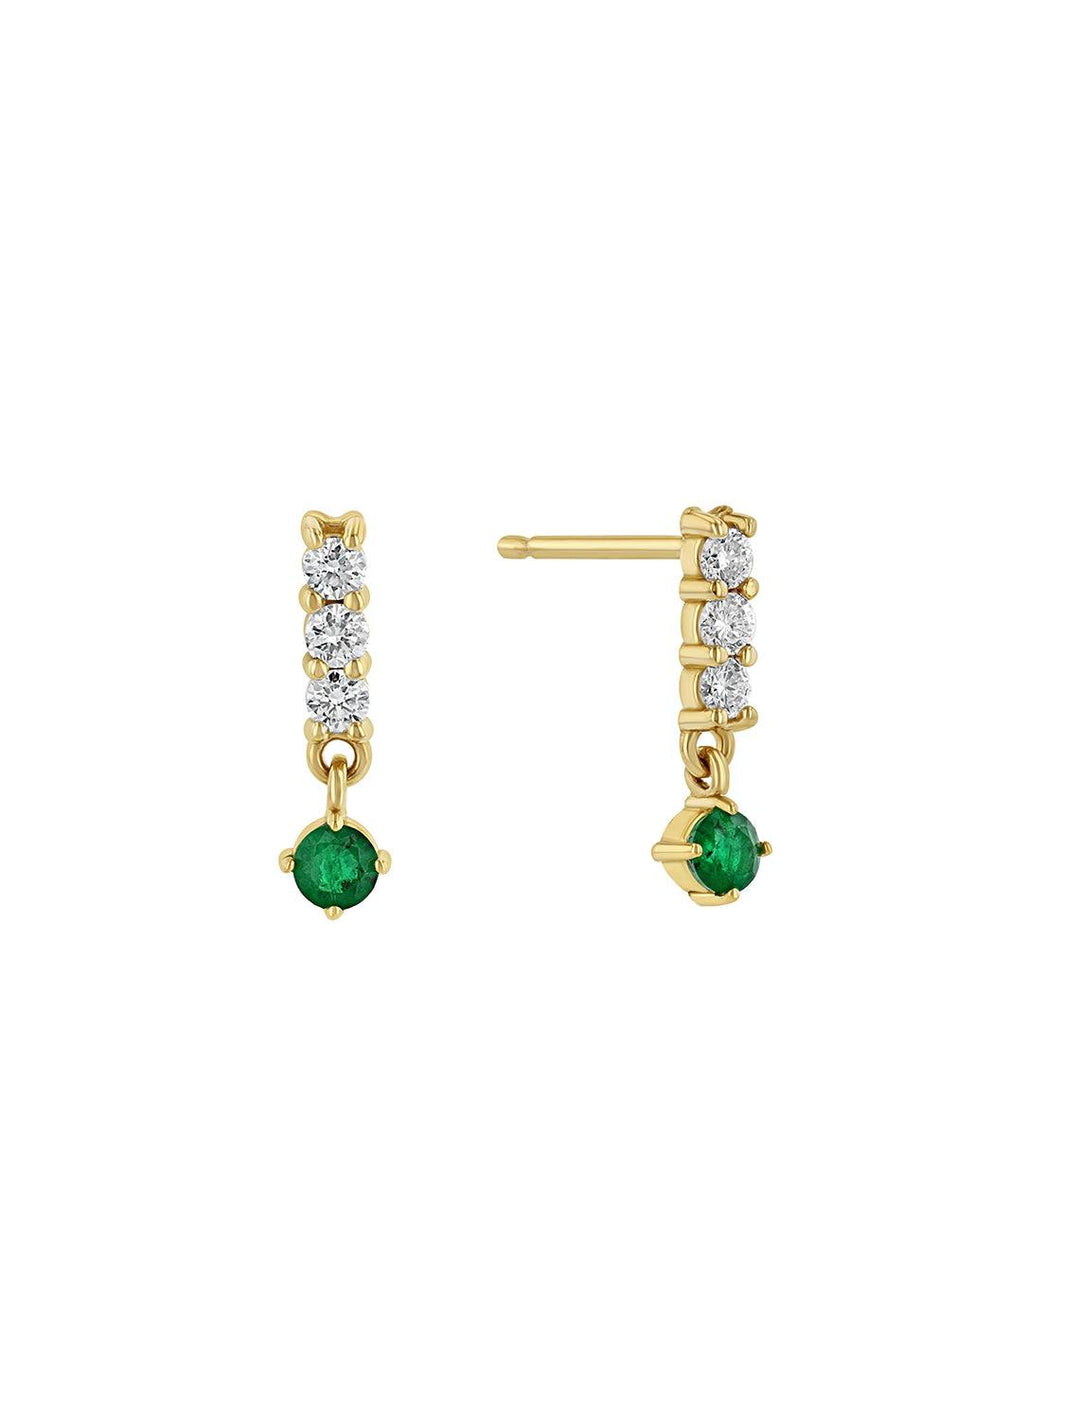 Front view of Zoe Chicco's 14k diamond bar earrings with emerald drops.